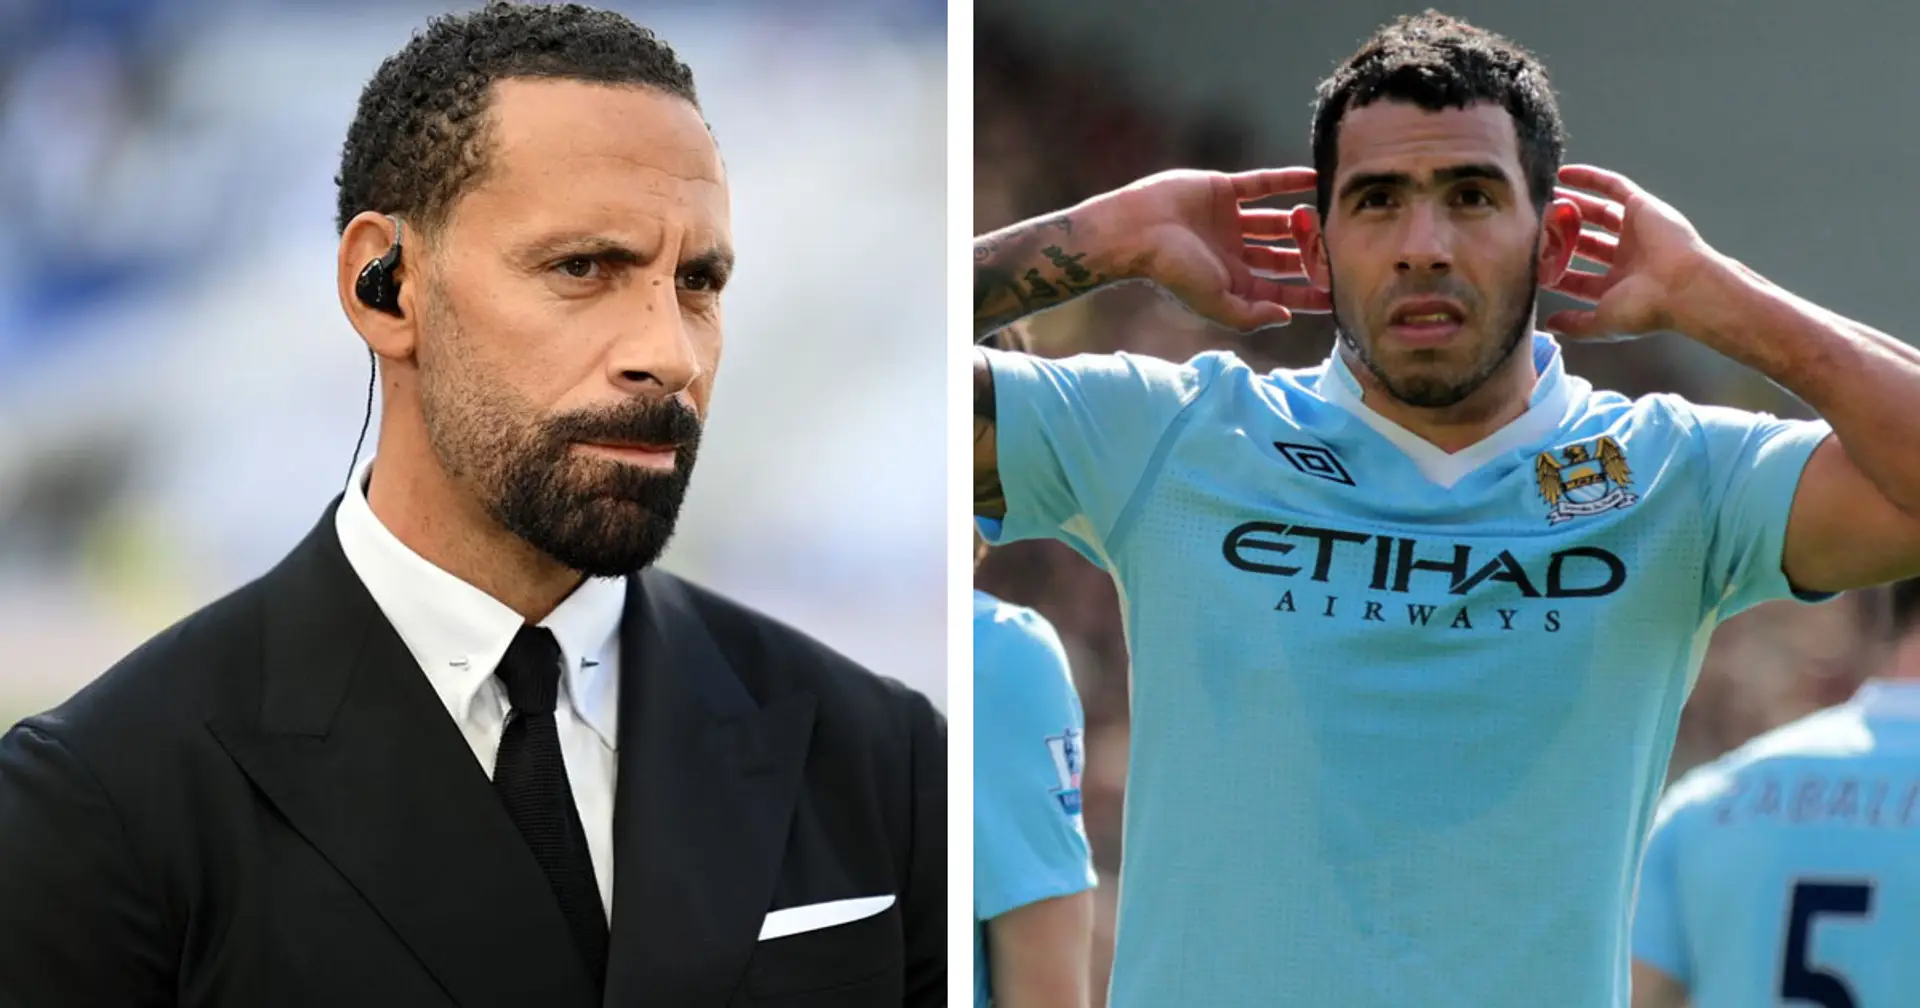 'He felt disrespected': Rio Ferdinand reveals how United squad reacted to Tevez joining Man City